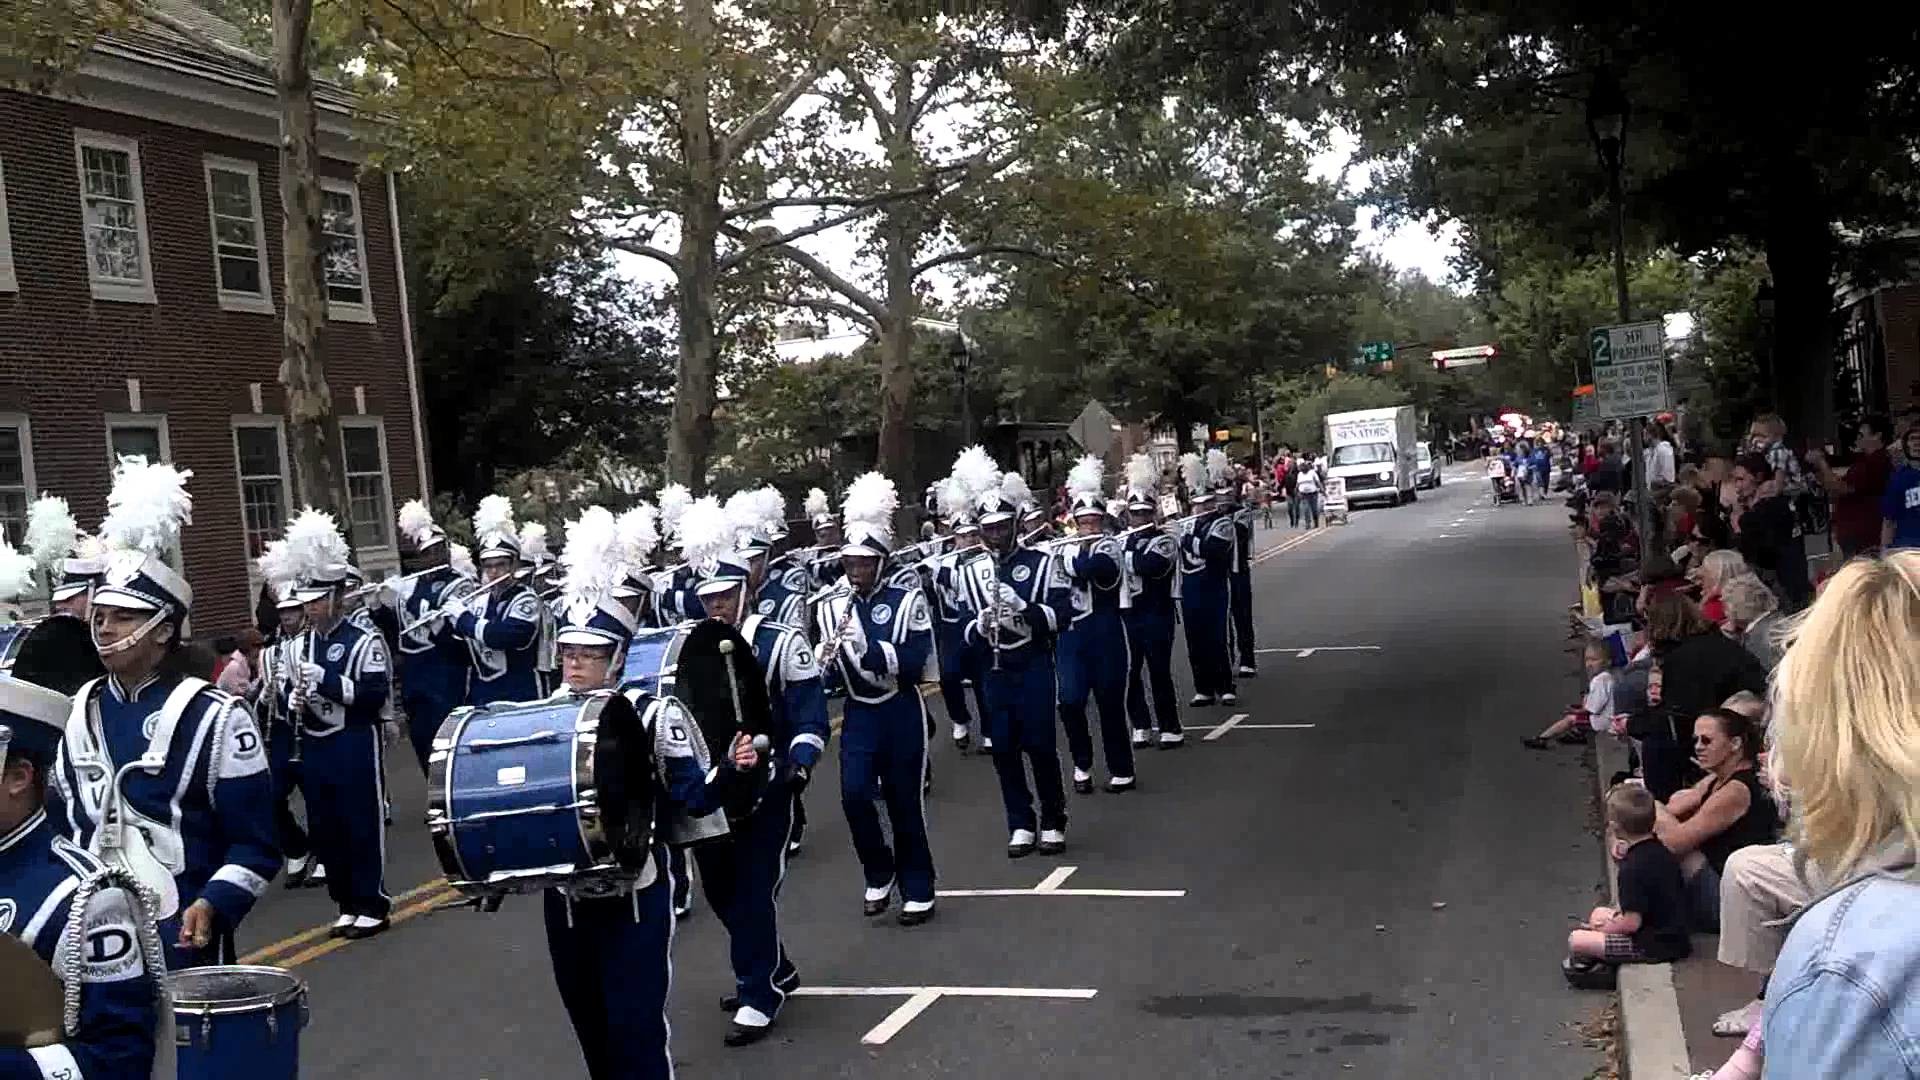 1920x1080 Dover High School Marching Band -- Taken 1st in Dover Delaware 9-14-13